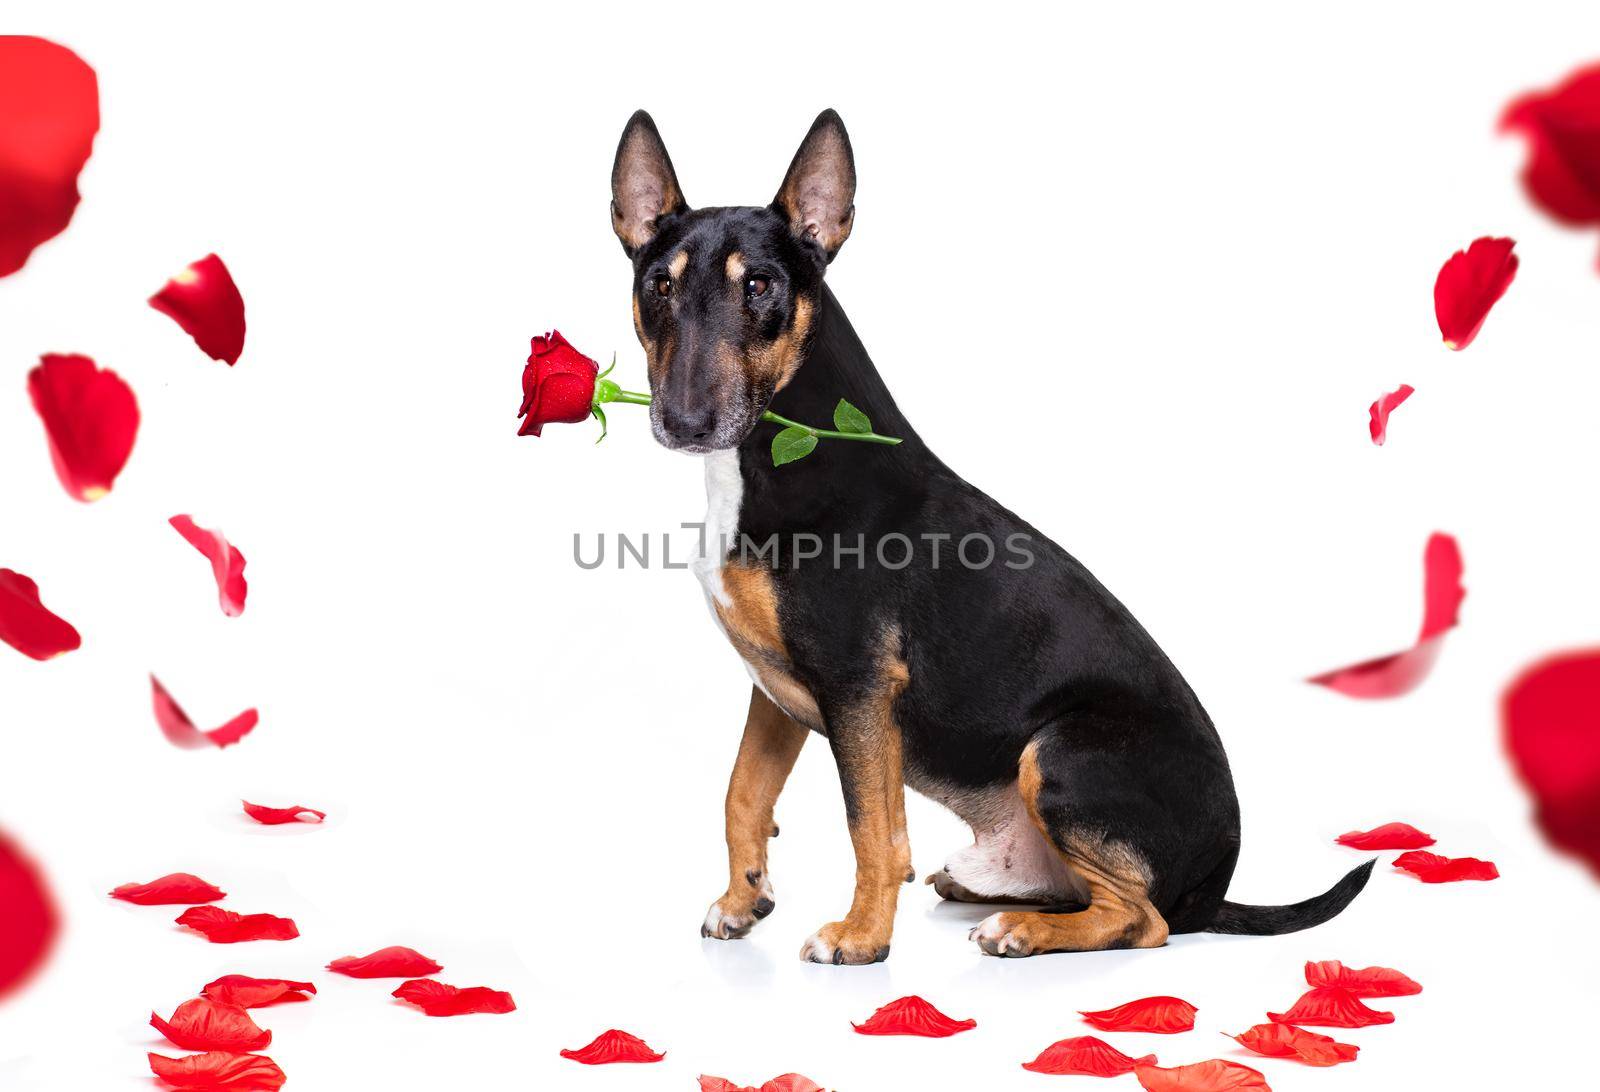 Miniature Bull Terrier dog on valentines love heart shape with I love you sign as background isolated on white